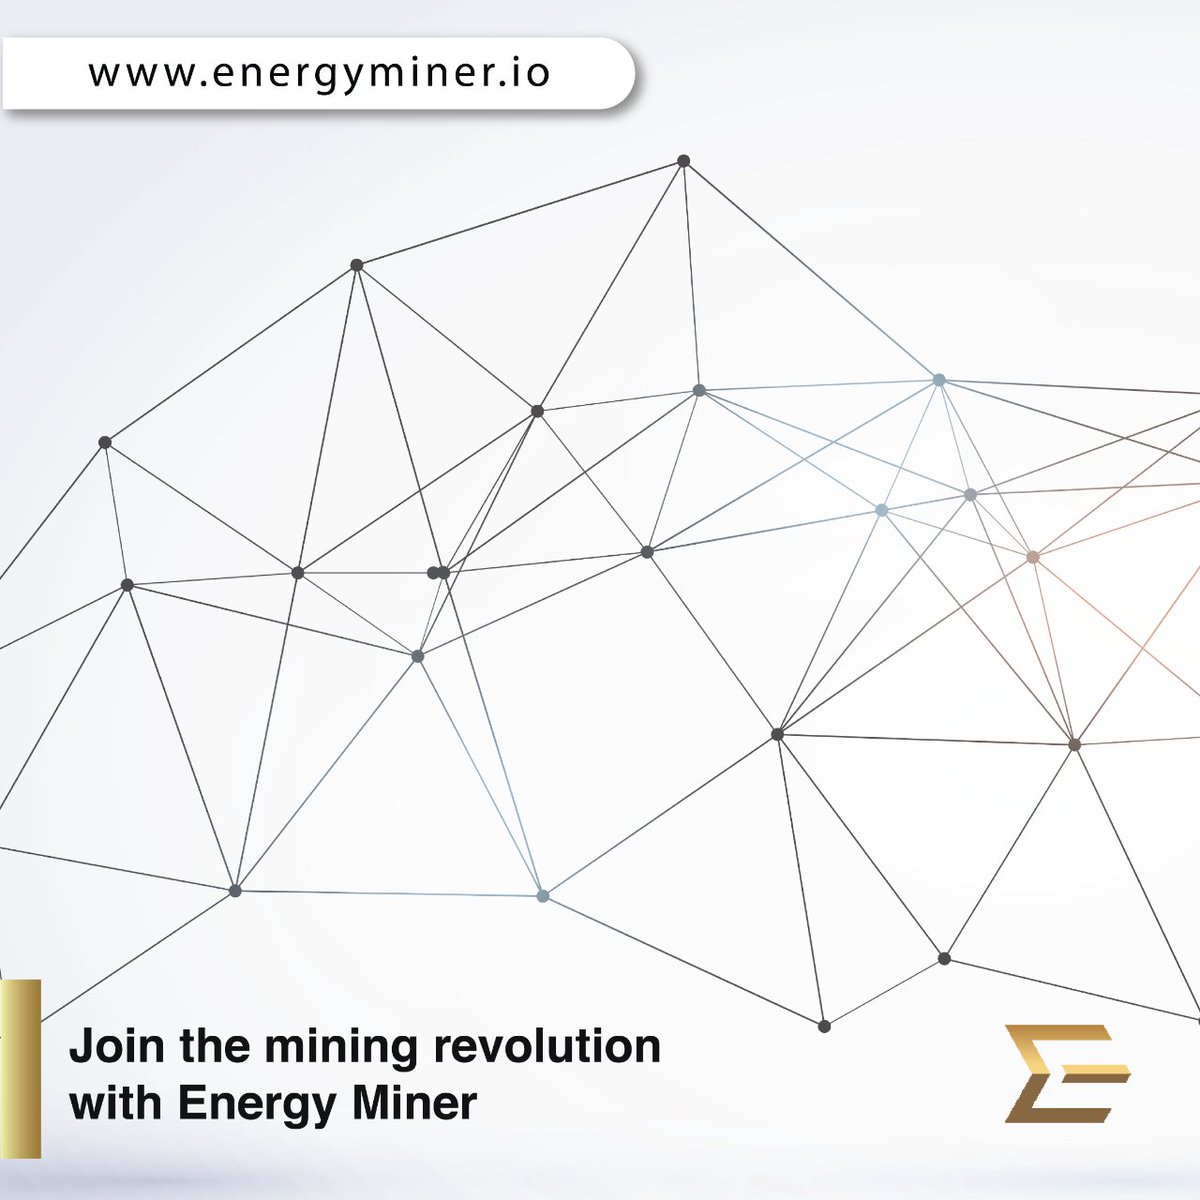 Convert your energy into digital wealth: Mining cryptocurrencies has never been more profitable than with us. ⚒️

➡️More info at energyminer.io

#SustainableMining #CryptoMining #BusinessSolutions #EnergyMiner #BitcoinMining #SustainableEnergy